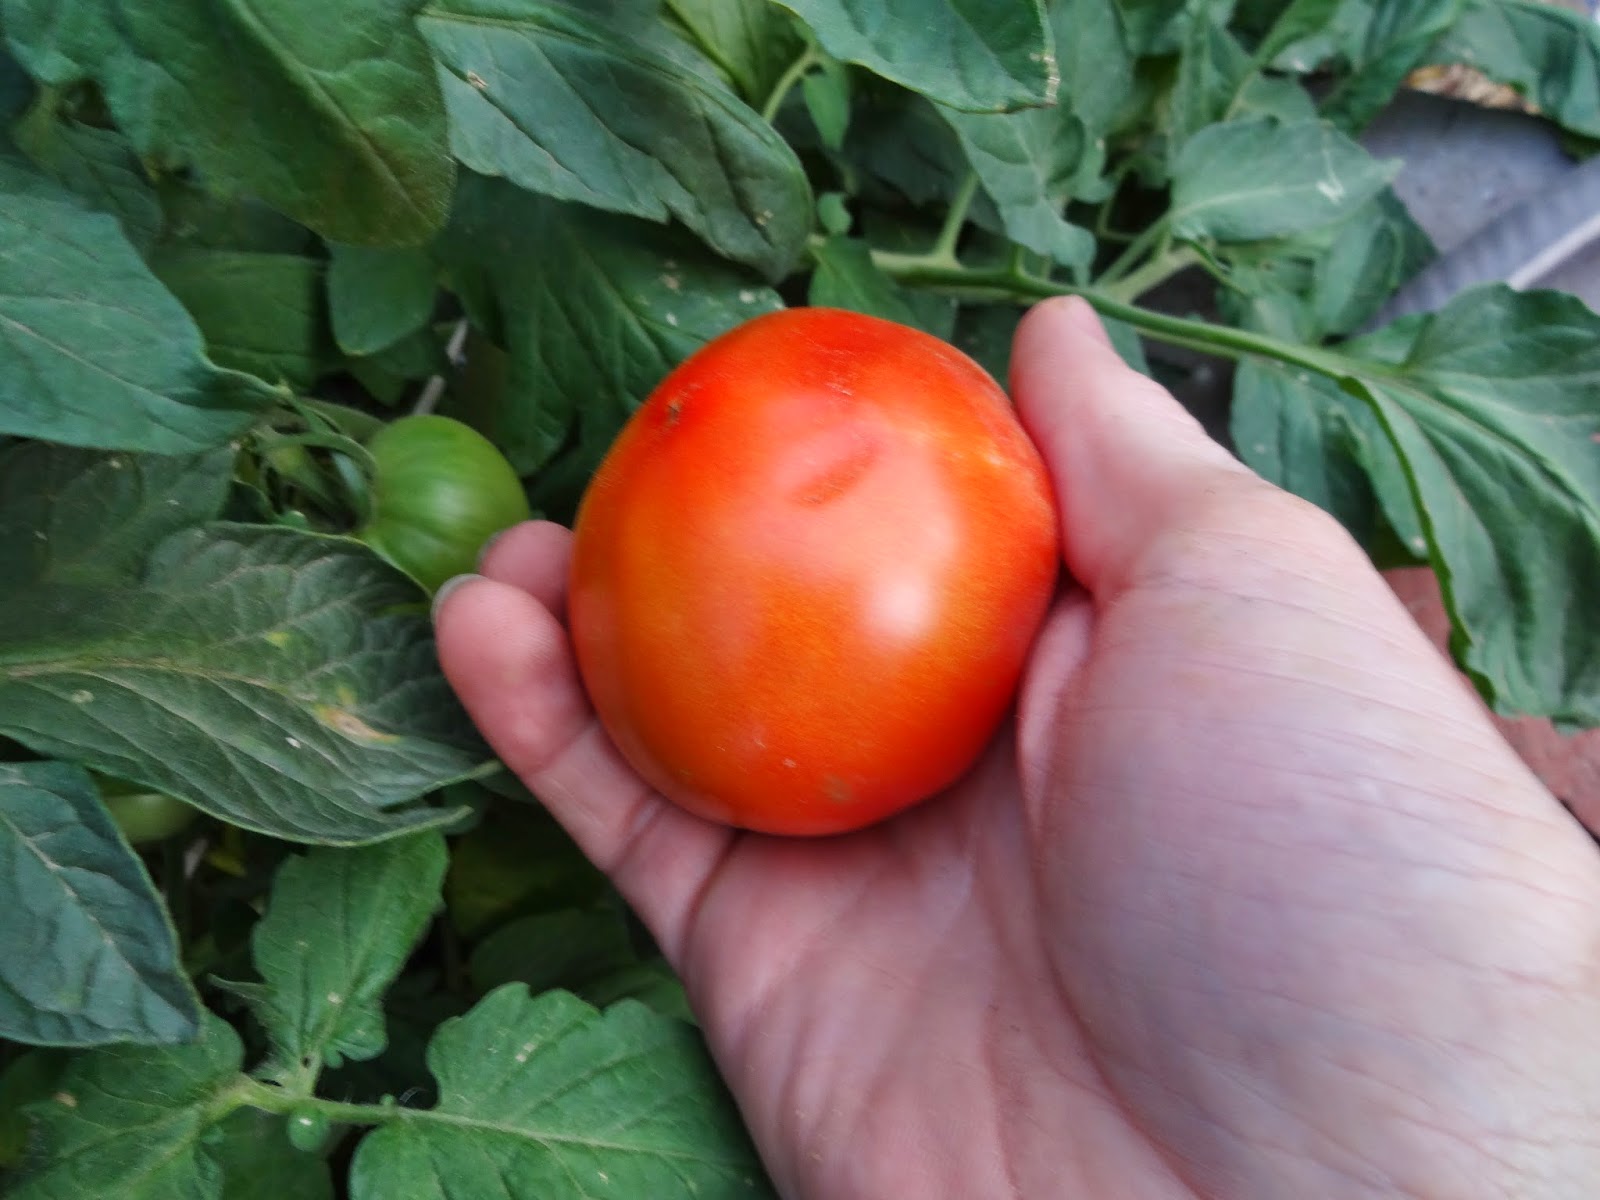 The Scientific Gardener: Out with the old and in with the new – Tomatoes!